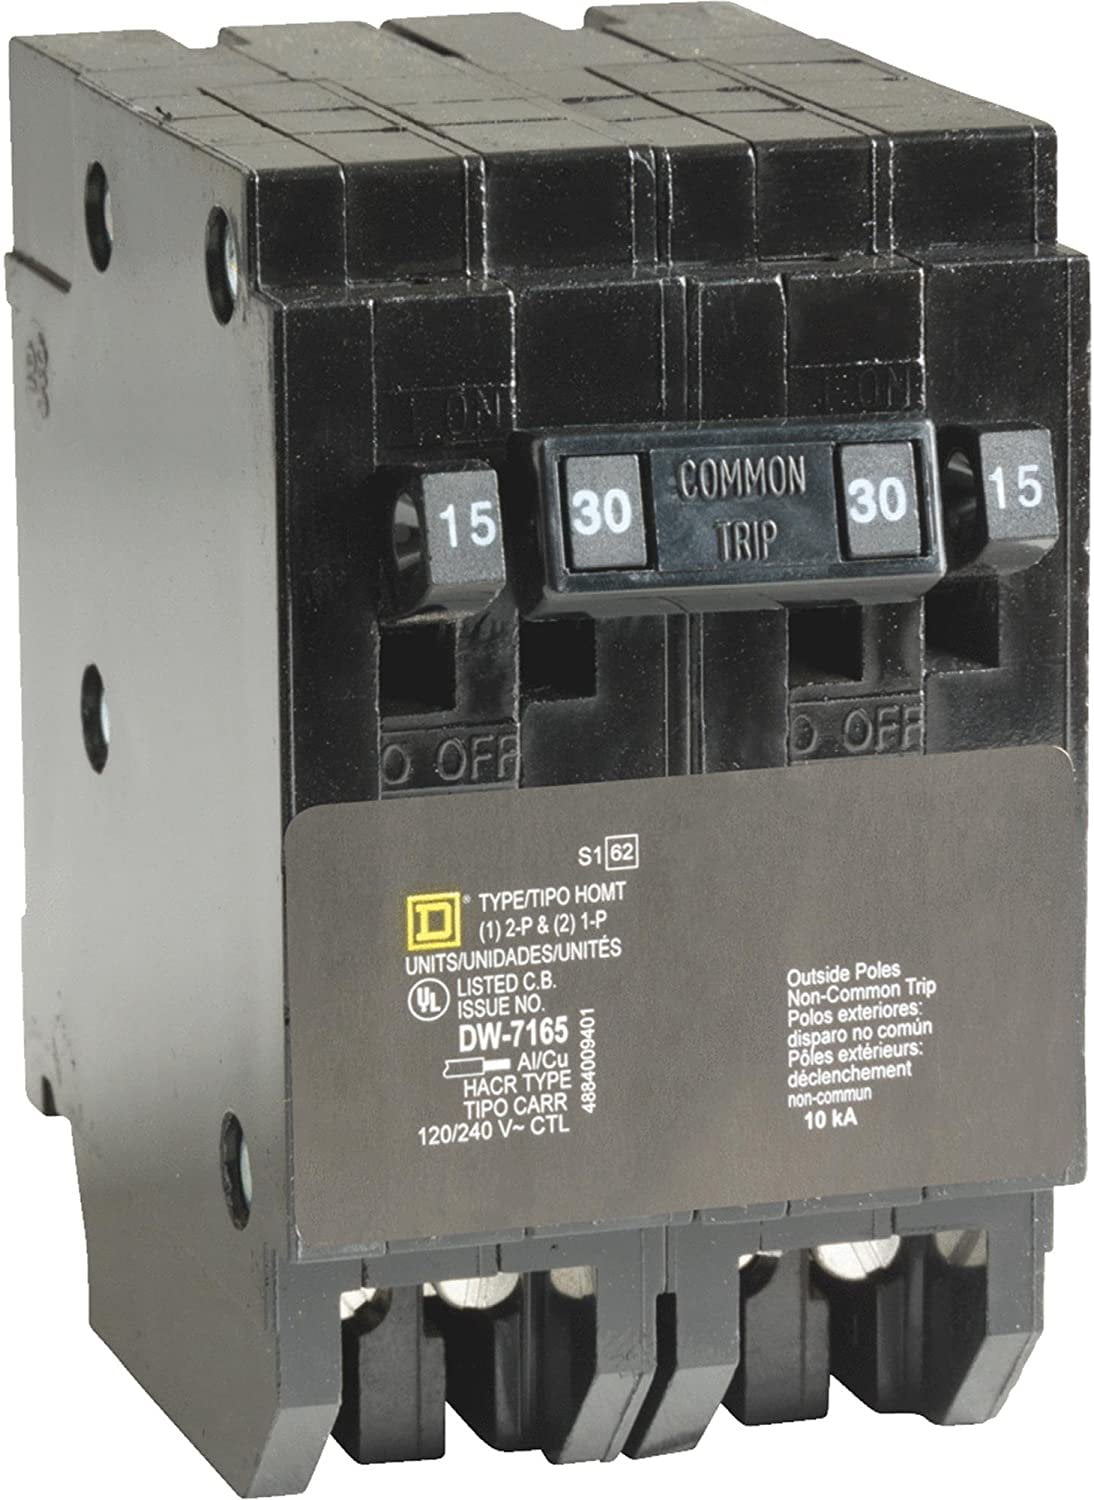 NEW SquareD Homeline CSED 30-Amp 2-Pole 120/240 Volt Circuit-Breaker Load-Switch 